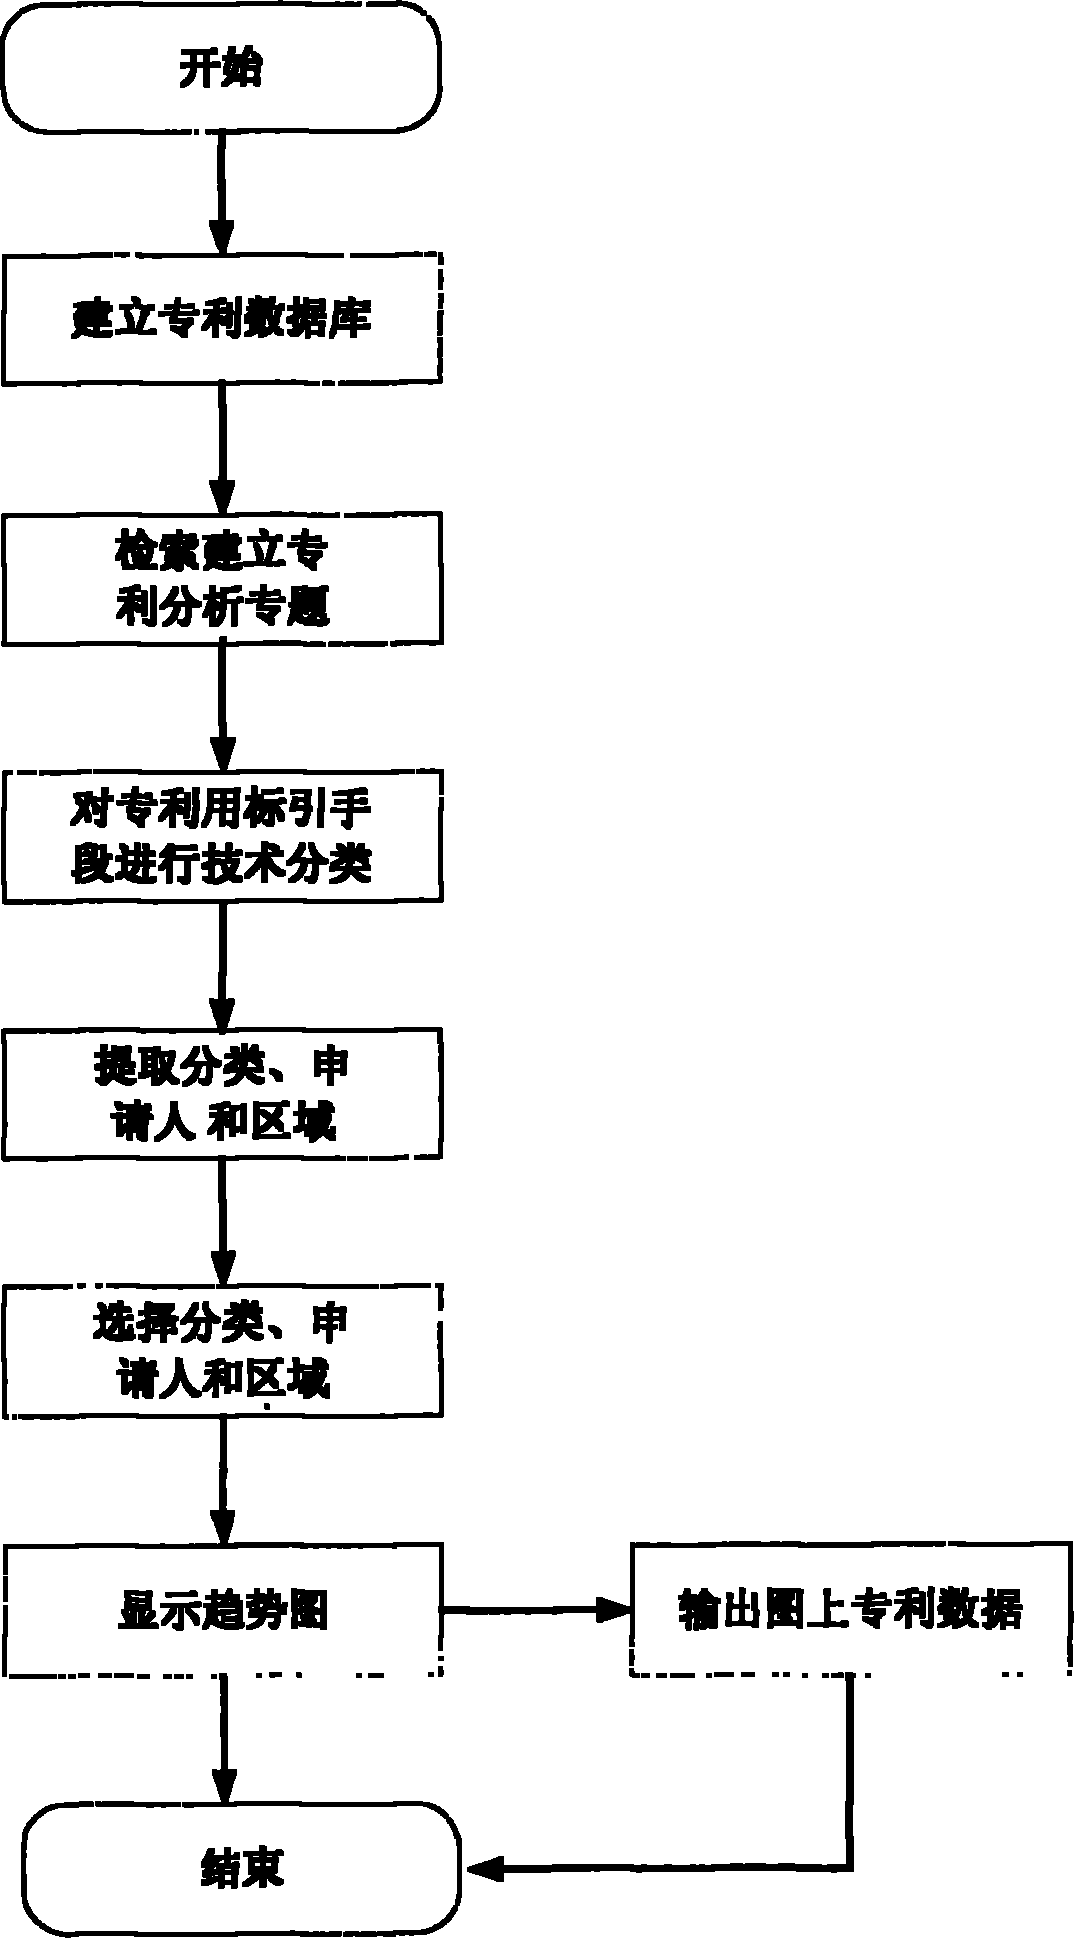 Analysis system of patent applicant regional technology development tendency